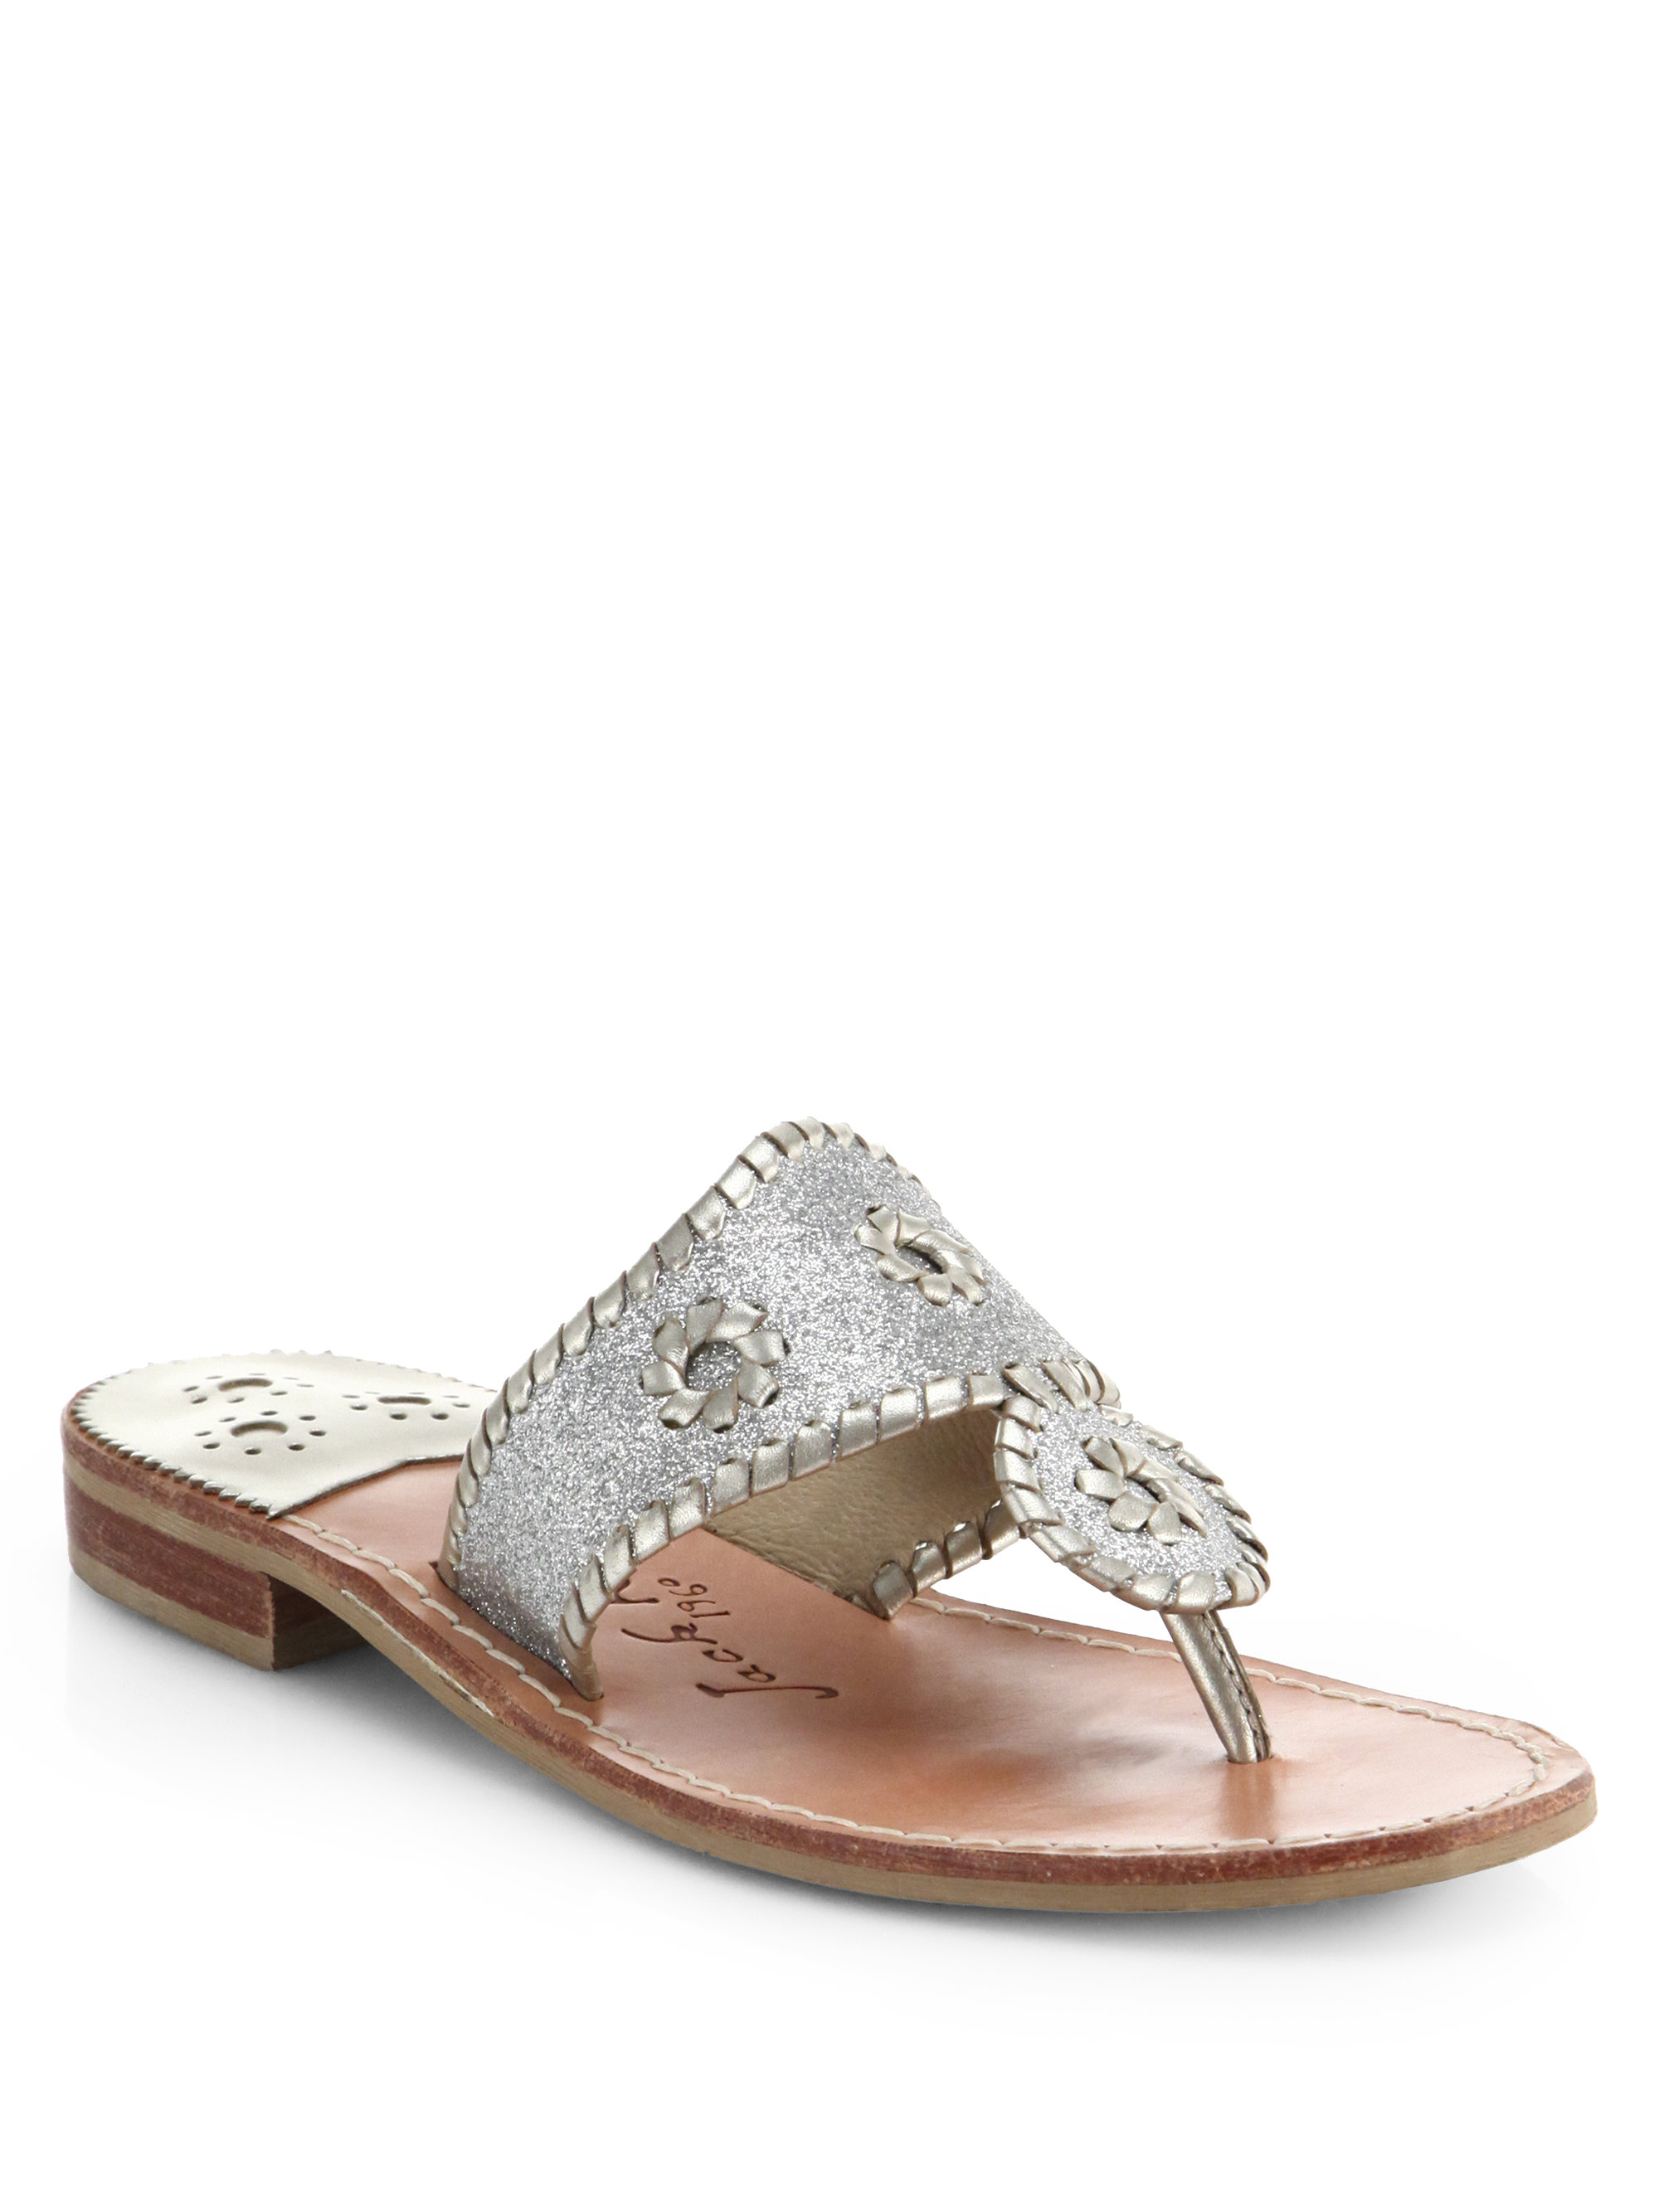 Lyst - Jack Rogers Sparkle Leather Thong Sandals in Metallic